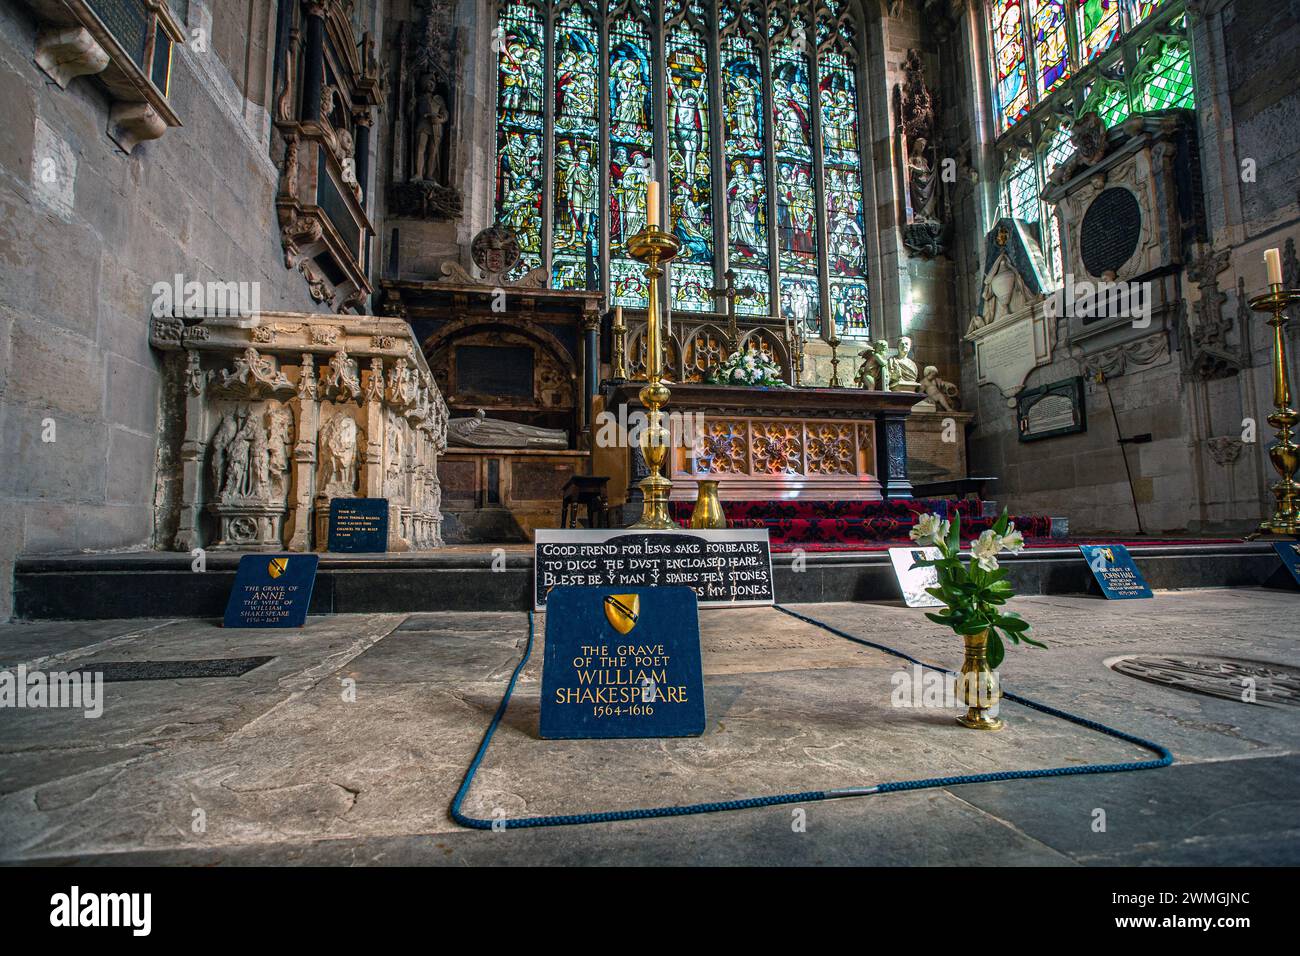 Tombe ou tombe de William Shakespeare (1564-1616) dans l'église Holy Trinity, alias Shakespeare's Church, Stratford-upon-Avon Warwickshire Angleterre UK Banque D'Images